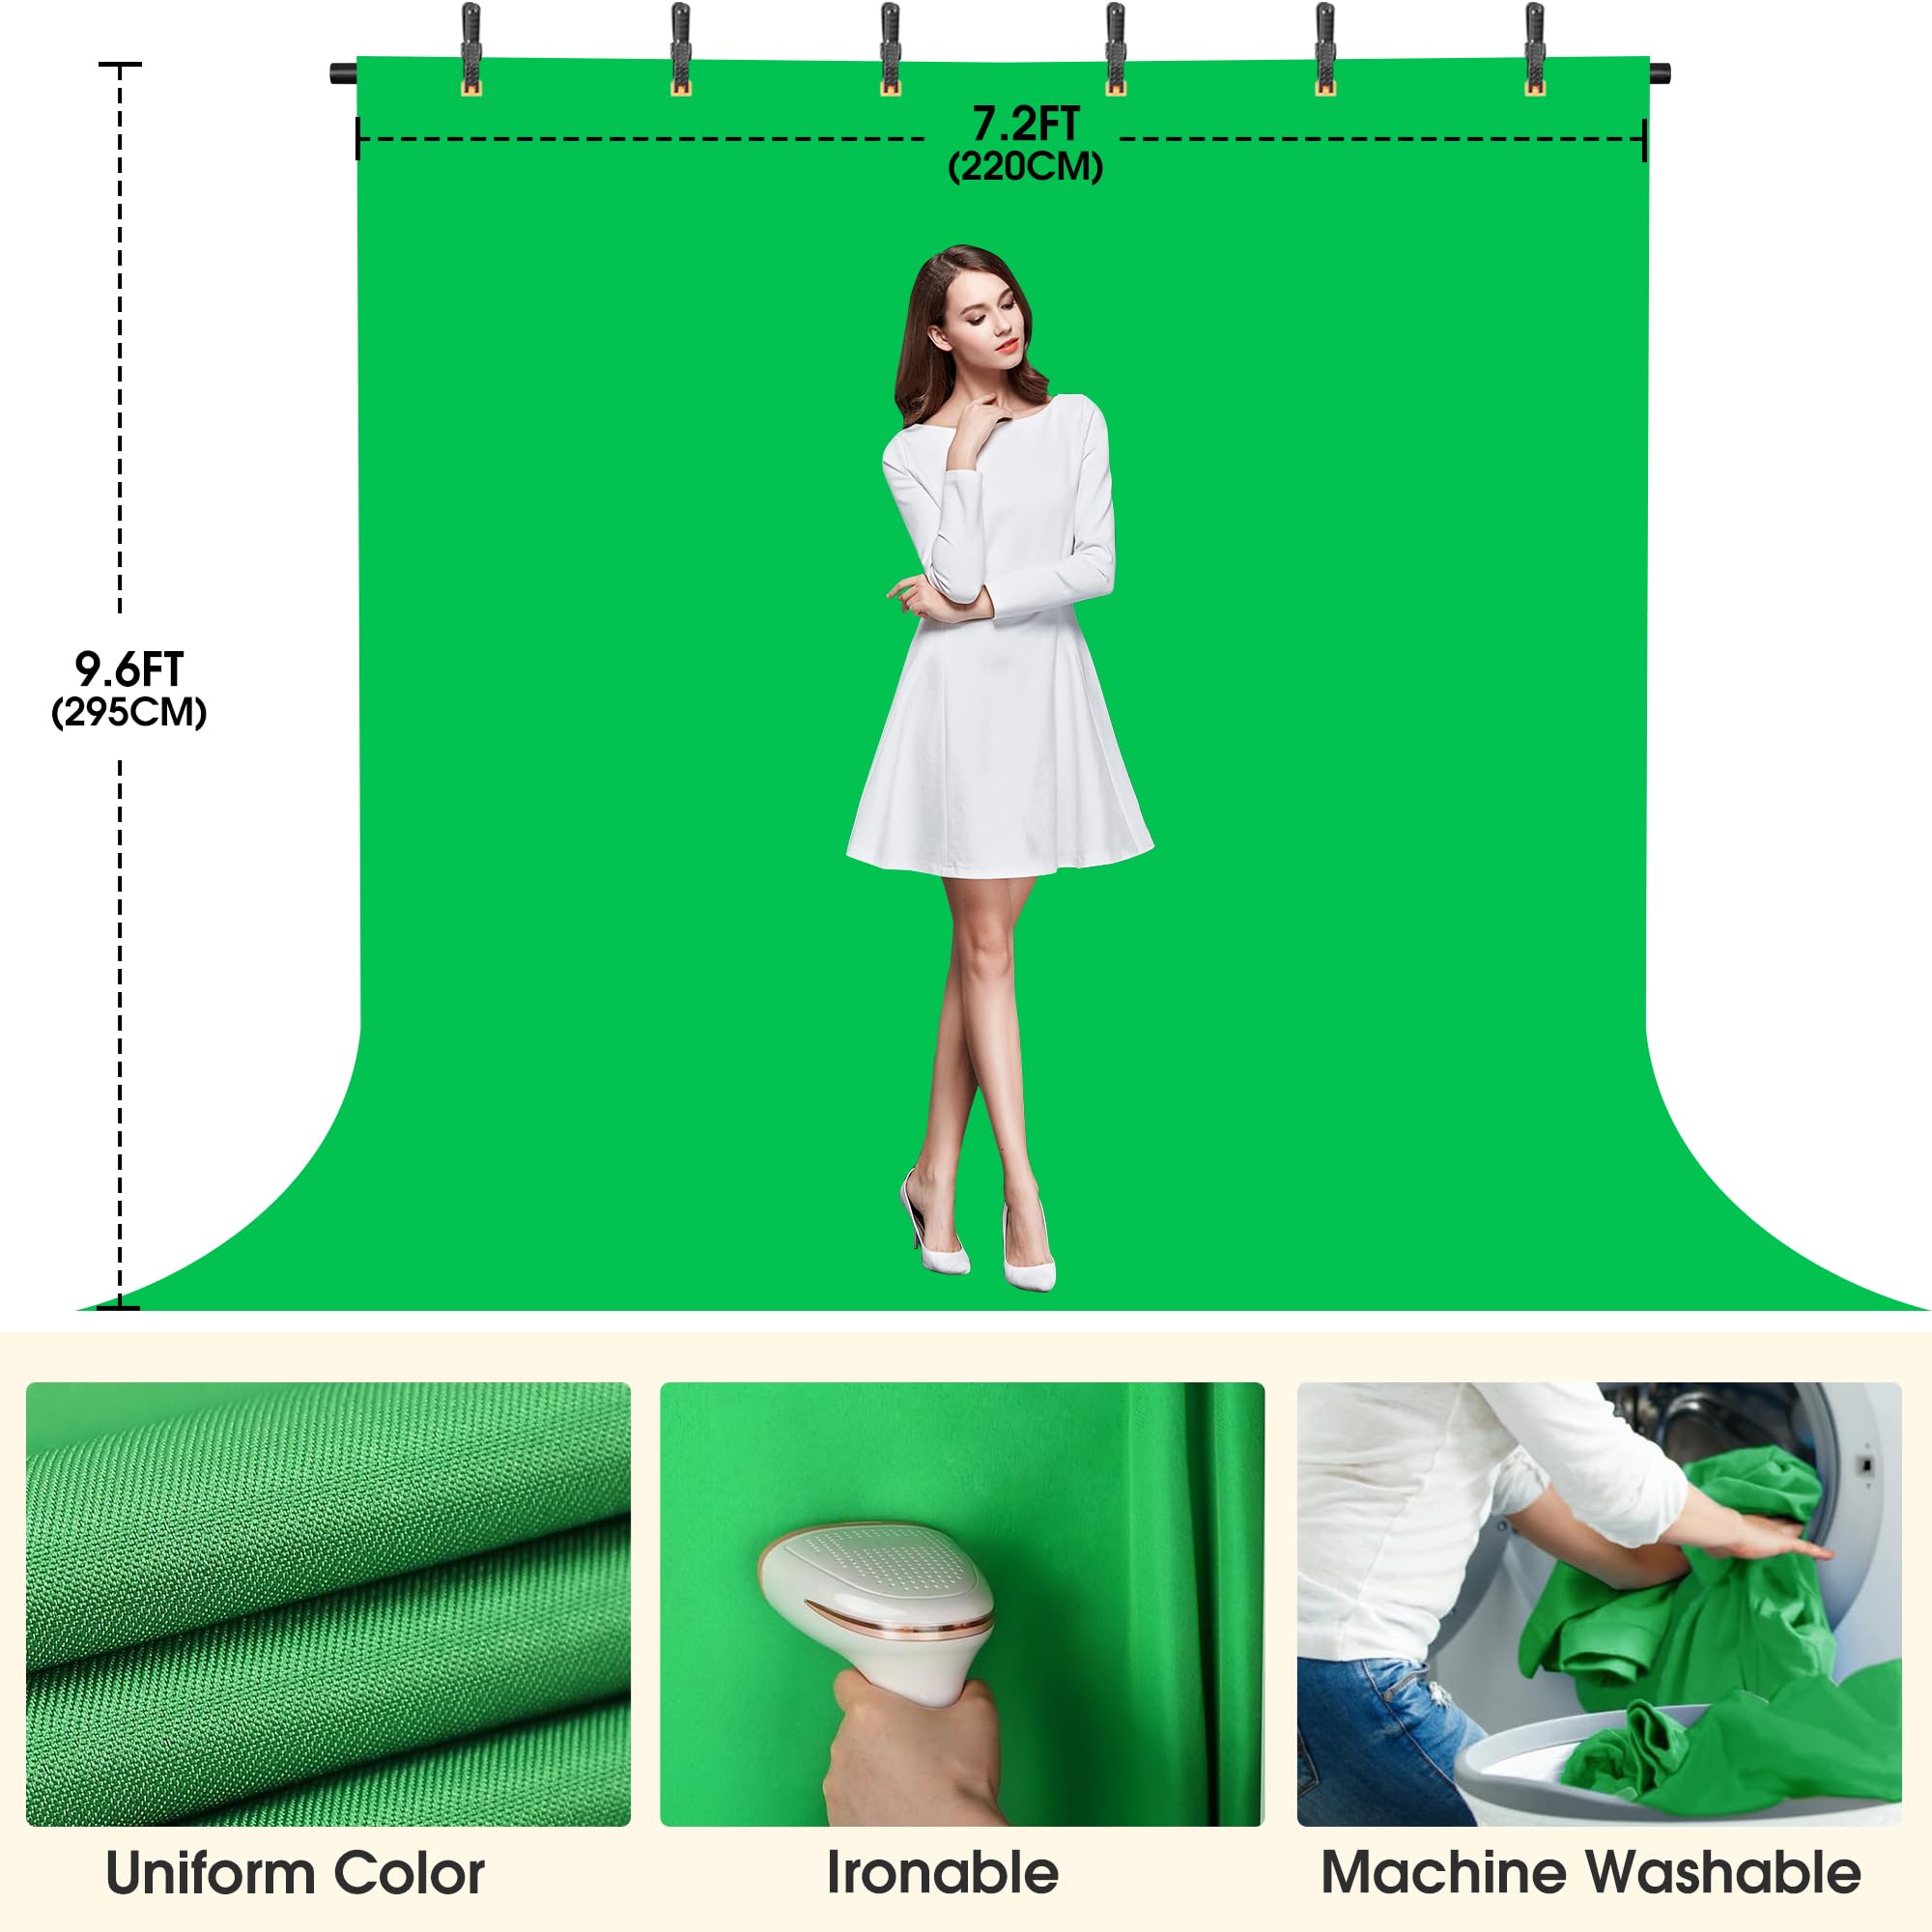 Green Screen Backdrop with Stand, 8x7.2ft Portable Greenscreen Background with Stand, T-Shape Green Screen Stand kit with 6 Spring Clamps, Sandbag, Carry Bag for Zoom, Video, Streaming and Photoshoot